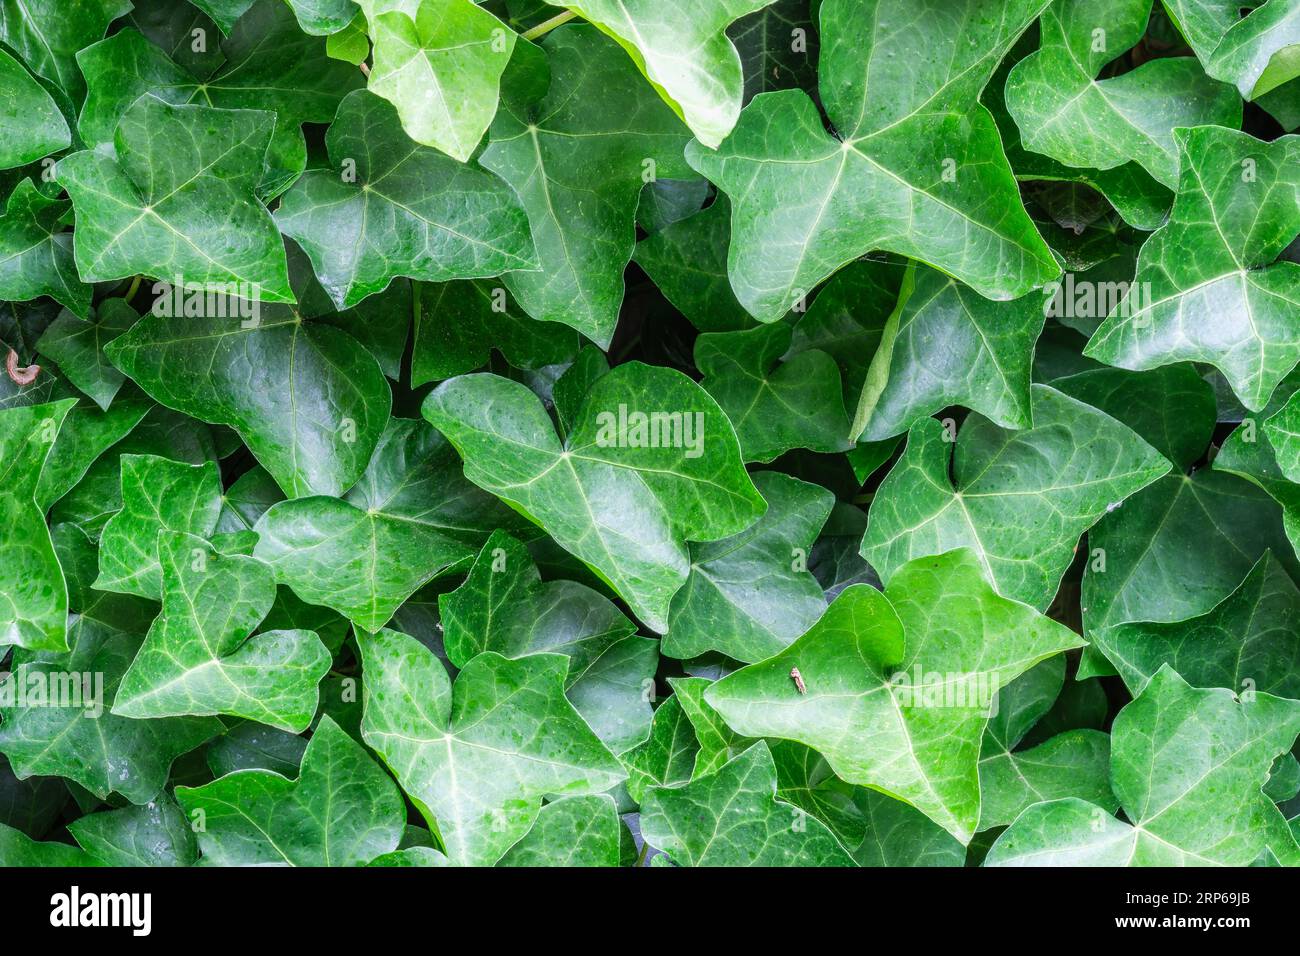 Top view of lush Hedera helix hibernica plant with fresh shiny green leaves as natural background. Hedera, commonly called ivy, an evergreen climbing Stock Photo